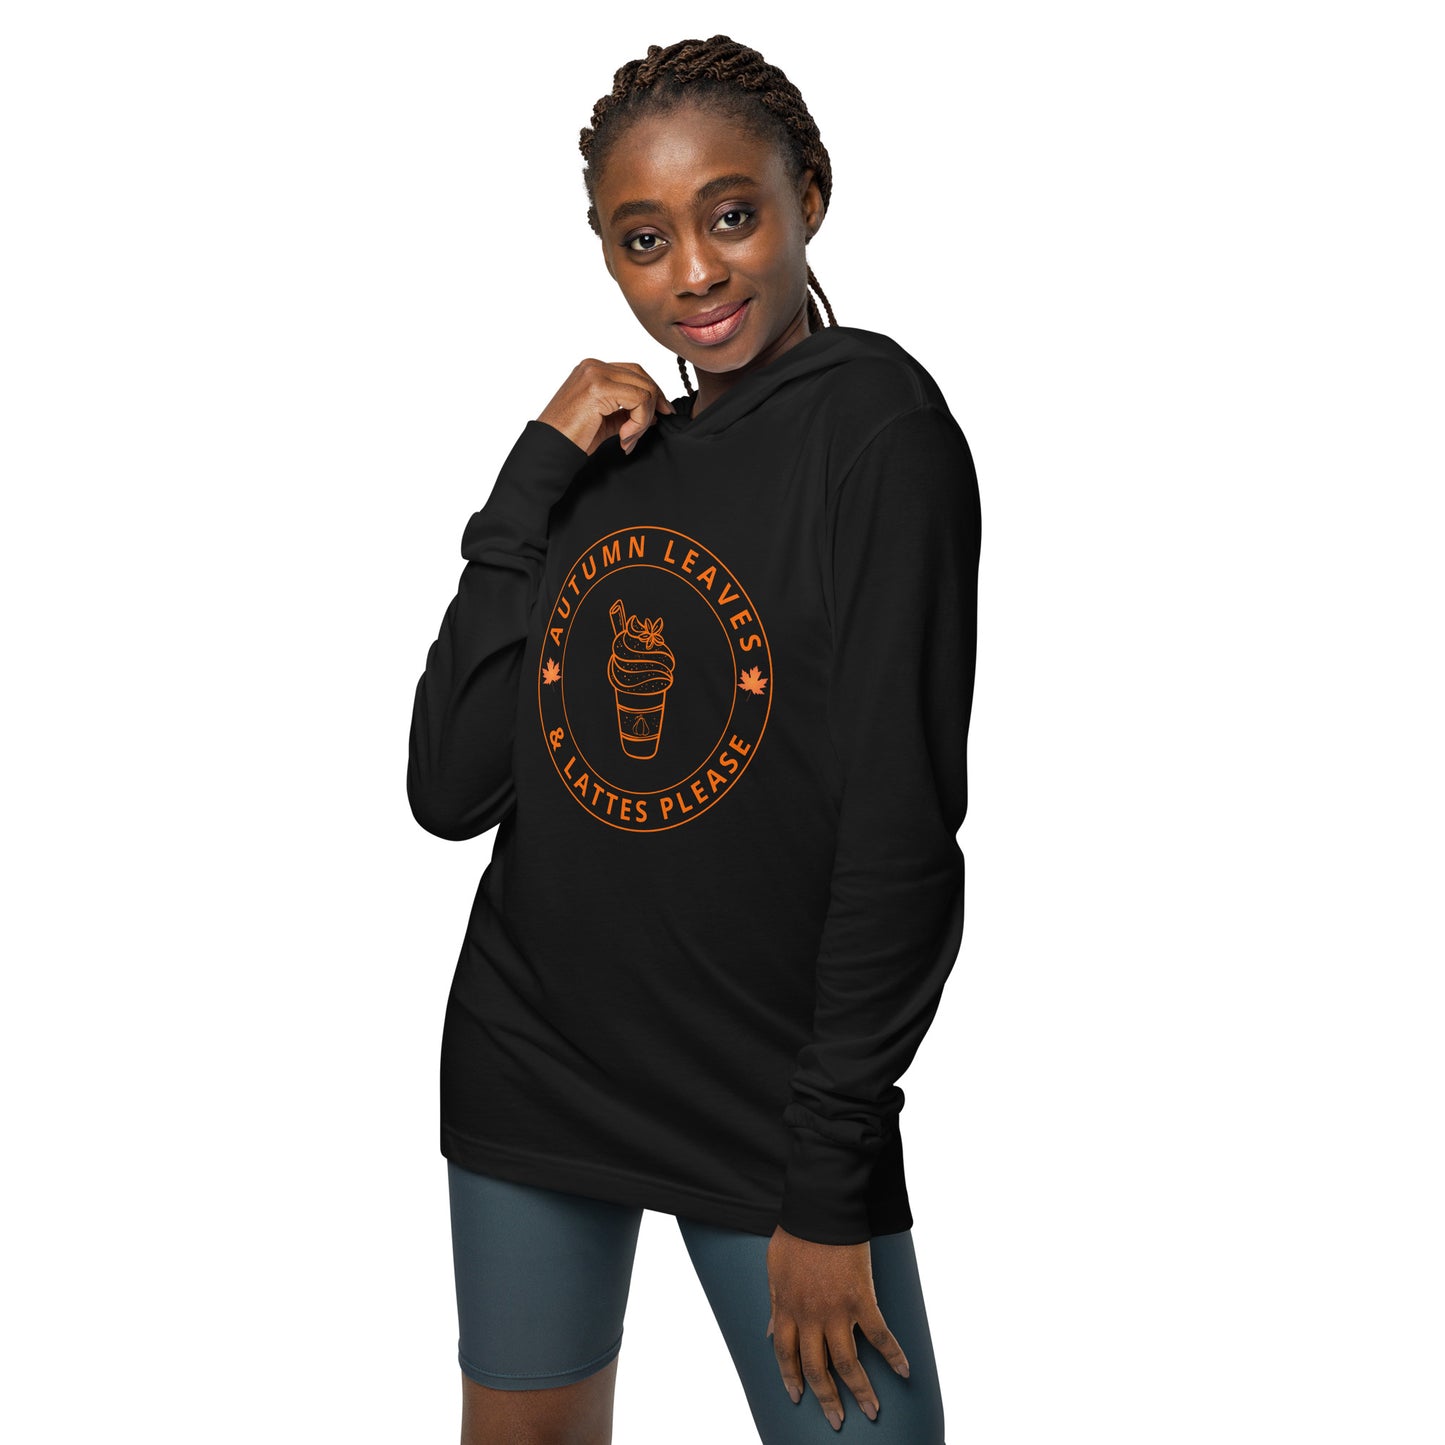 Autumn Leaves and Lattes Please Hooded Long-Sleeve Tee